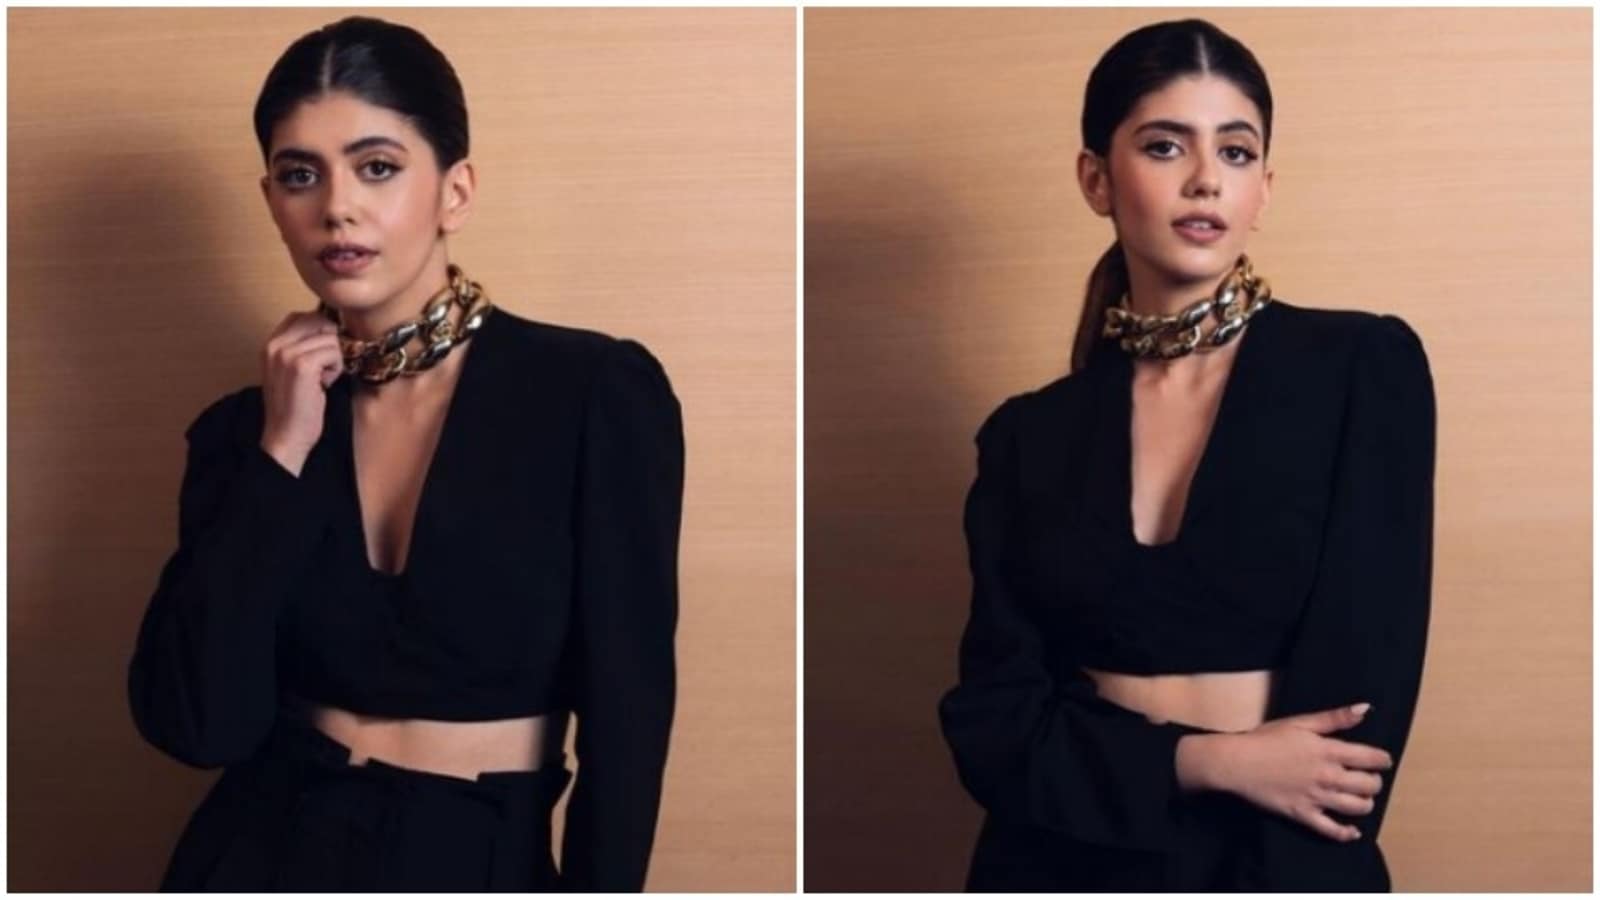 Sanjana Sanghi, in a black co-ord set, is the epitome of grace